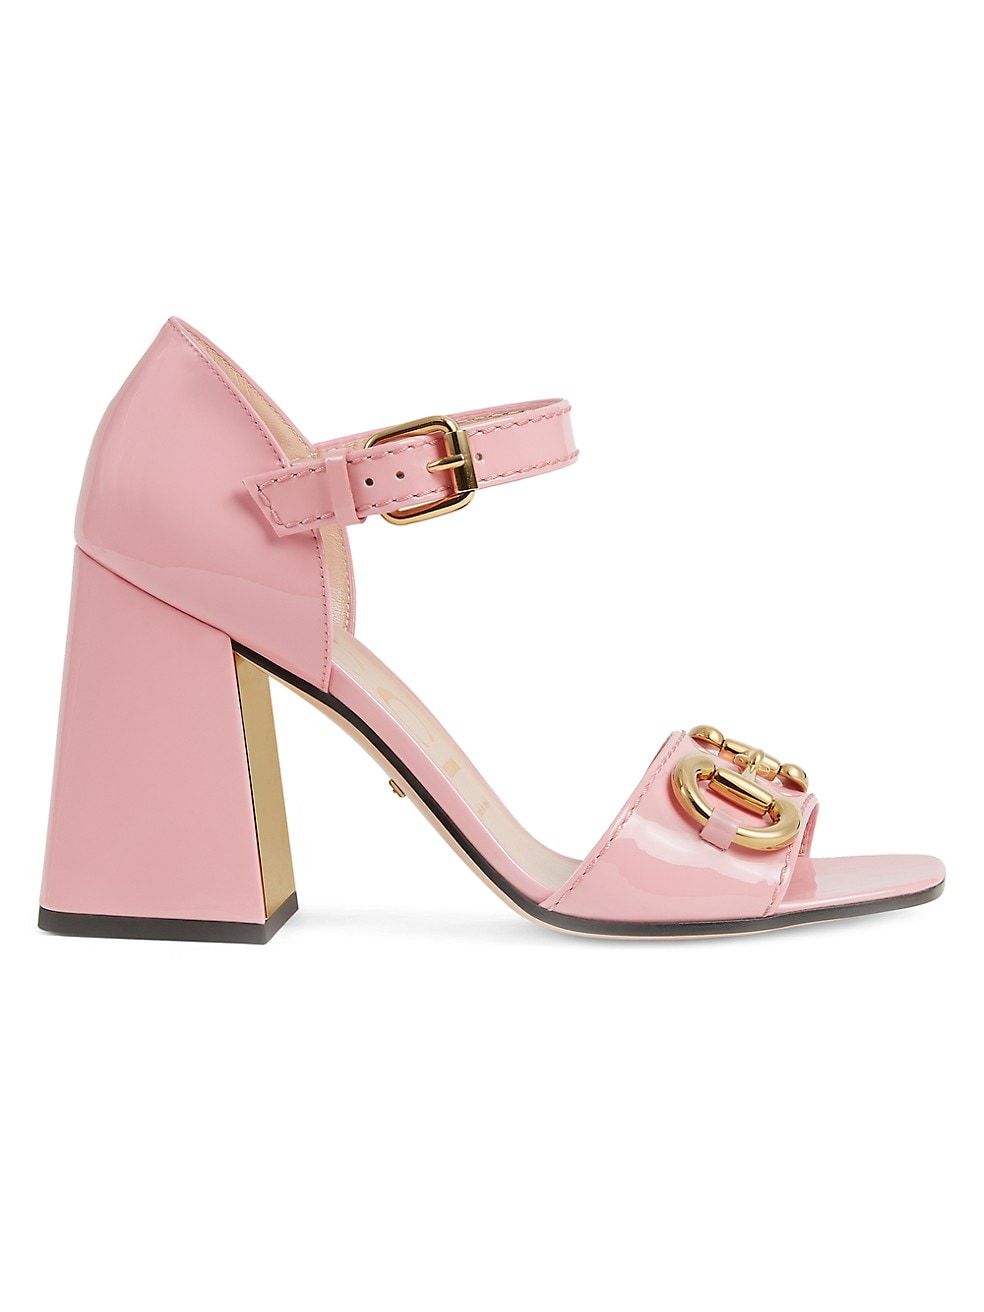 Gucci Baby Buckle Horsebit Ankle-Strap Sandals | Saks Fifth Avenue